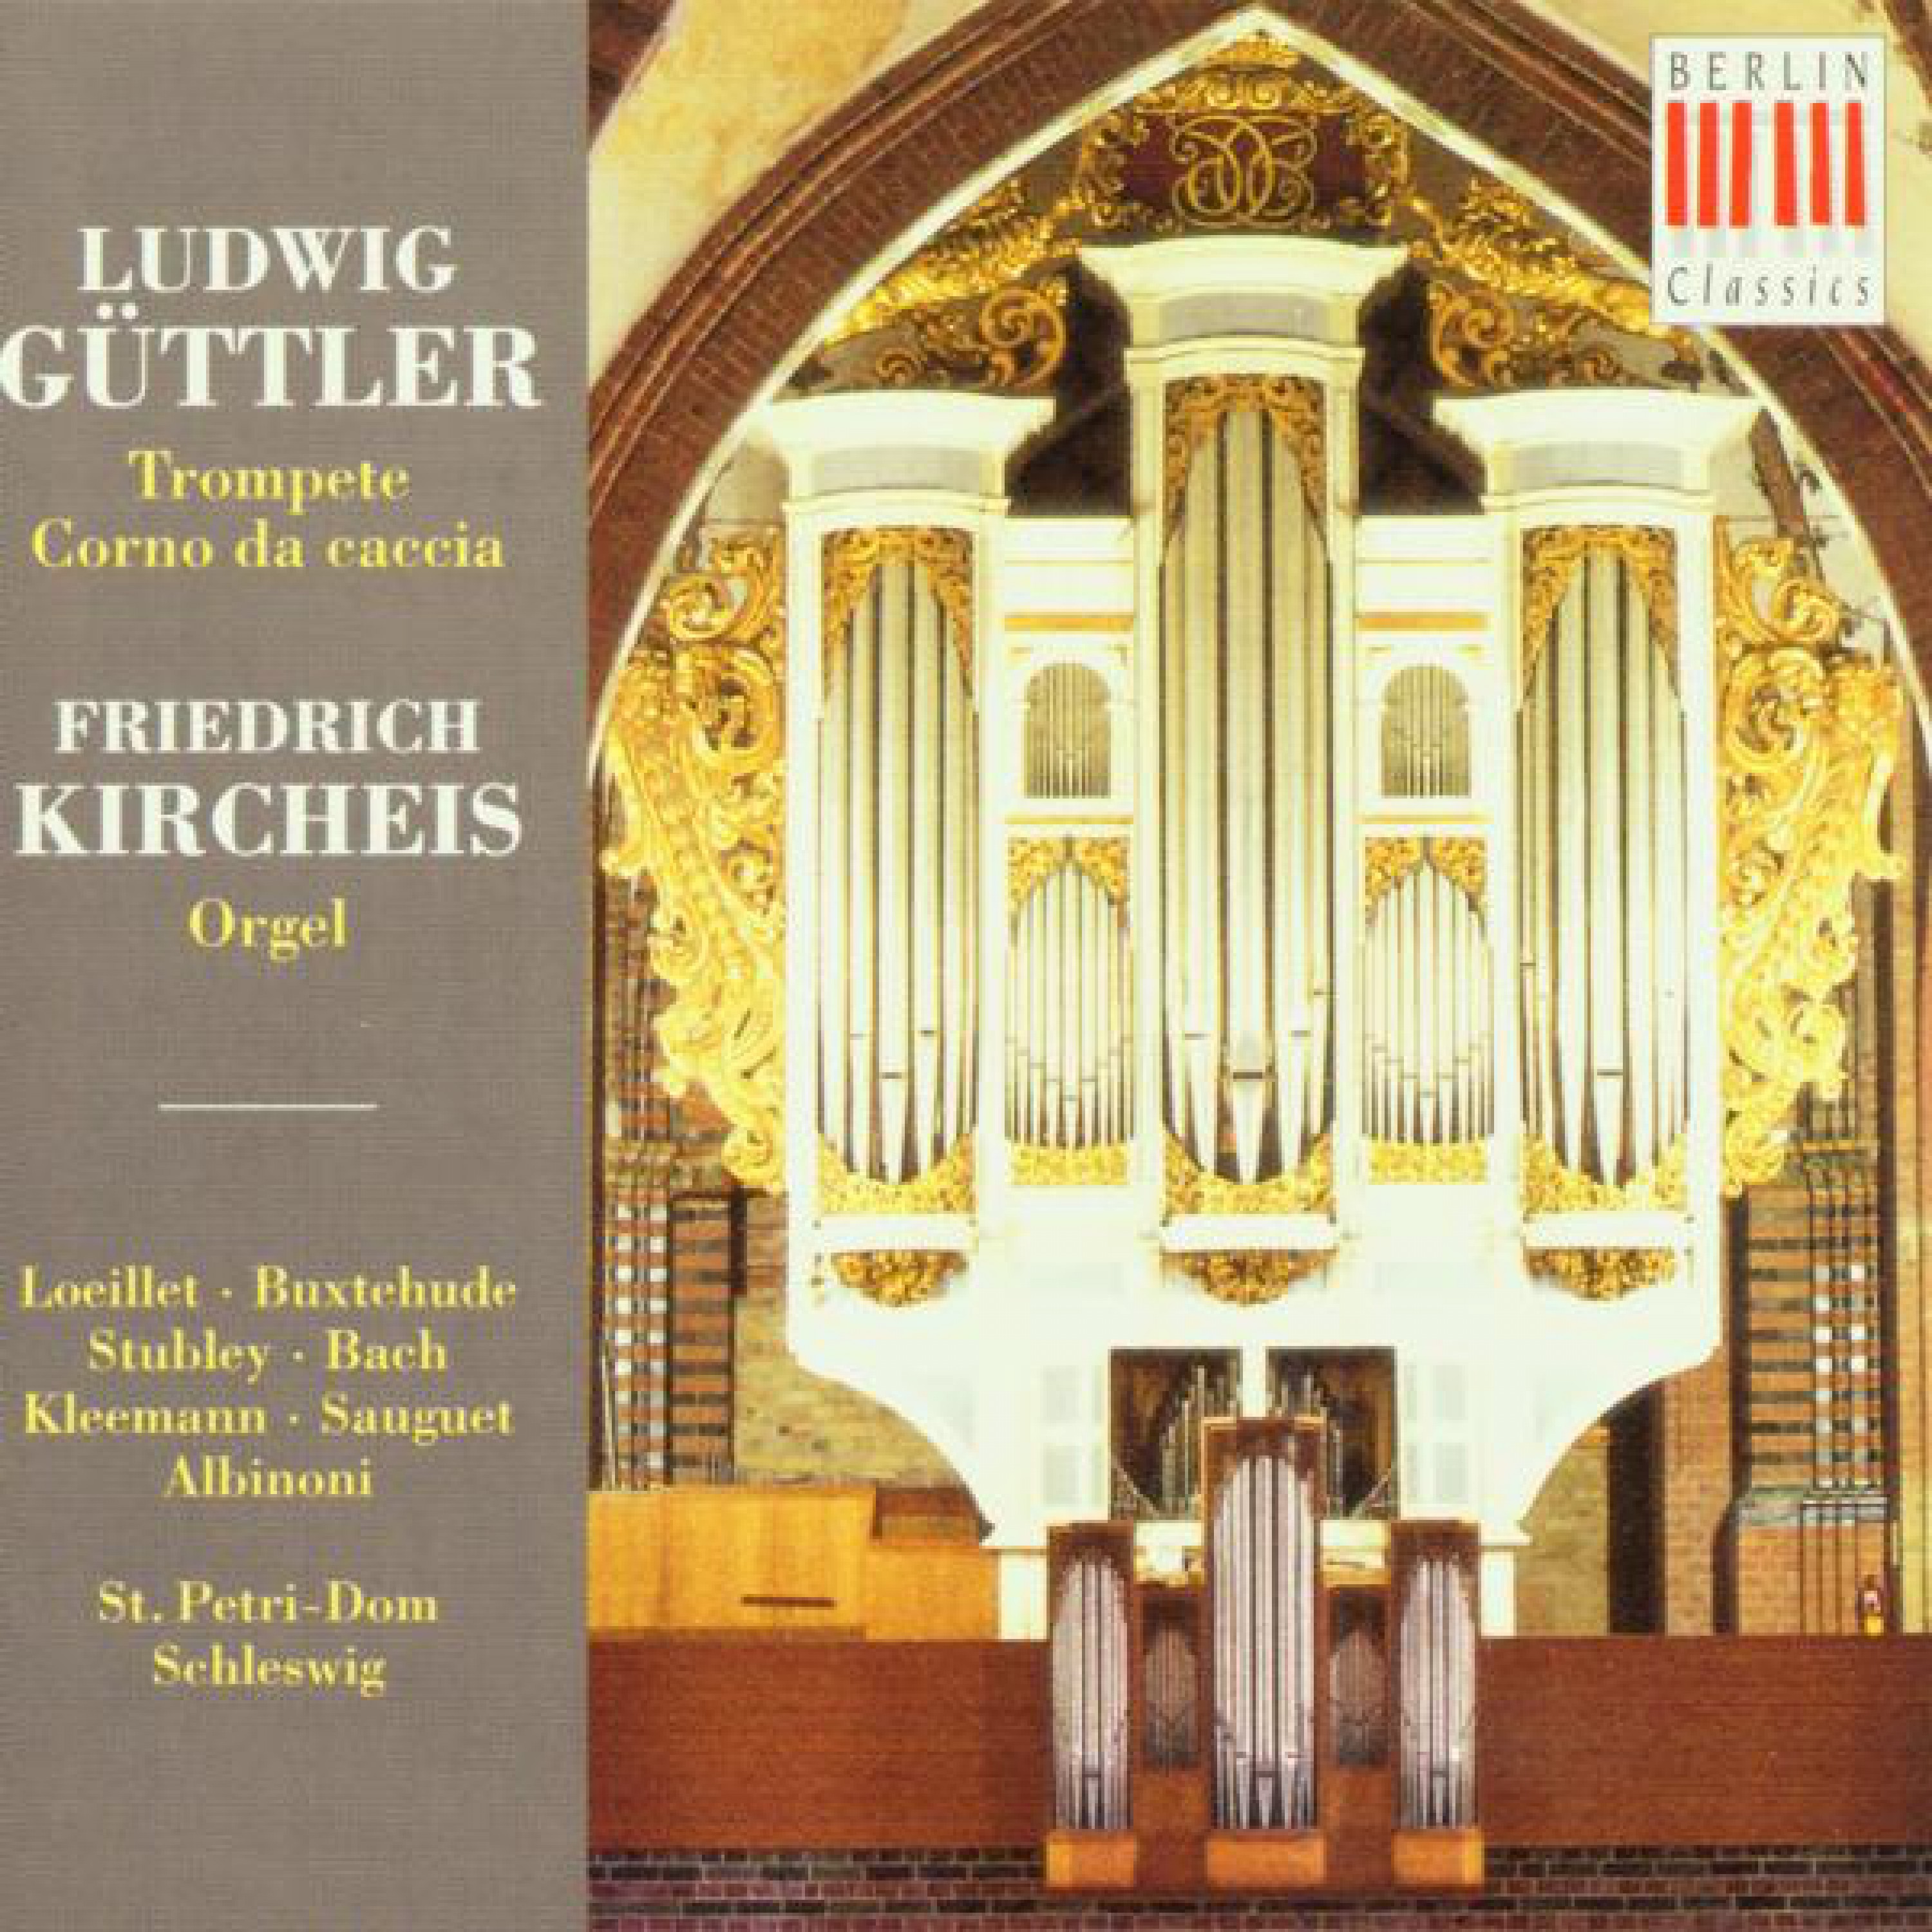 Choral Prelude for Trumpet and Organ: Schmü cke dich, o liebe Seele